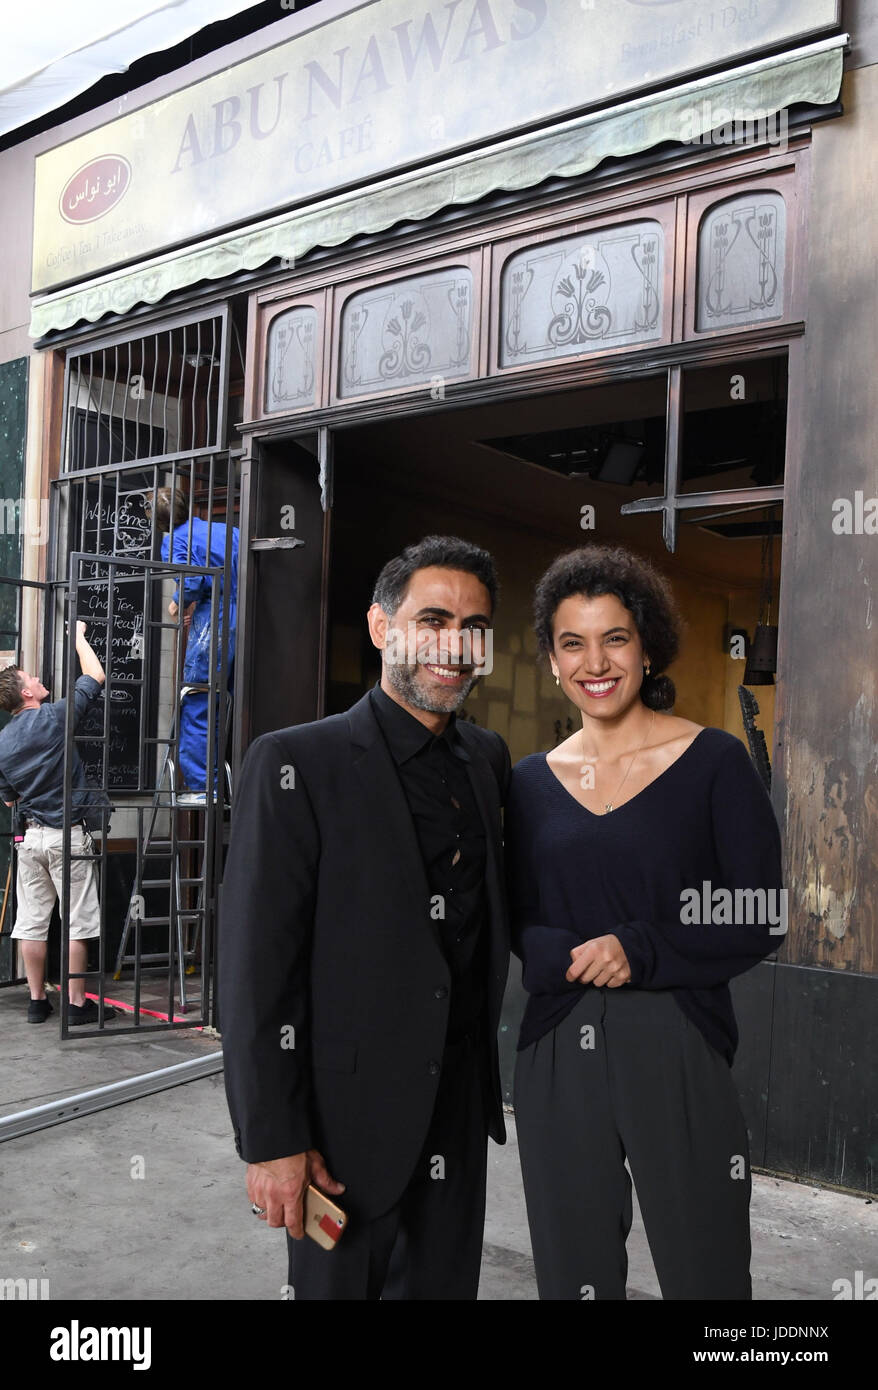 Cologne, Germany. 19th June, 2017. Actors Ali Daeem (Ahmed) and Zahraa Ghandour (Amal Jerjis) pose during a photo call at the shooting of the movie 'Baghdad in my shadow' on set in Cologne, Germany, 19 June 2017. The German-Swiss-British co-production is said to hit cinemas in the summer of 2018. - NO WIRE SERVICE - Photo: Horst Galuschka/dpa/Alamy Live News Stock Photo